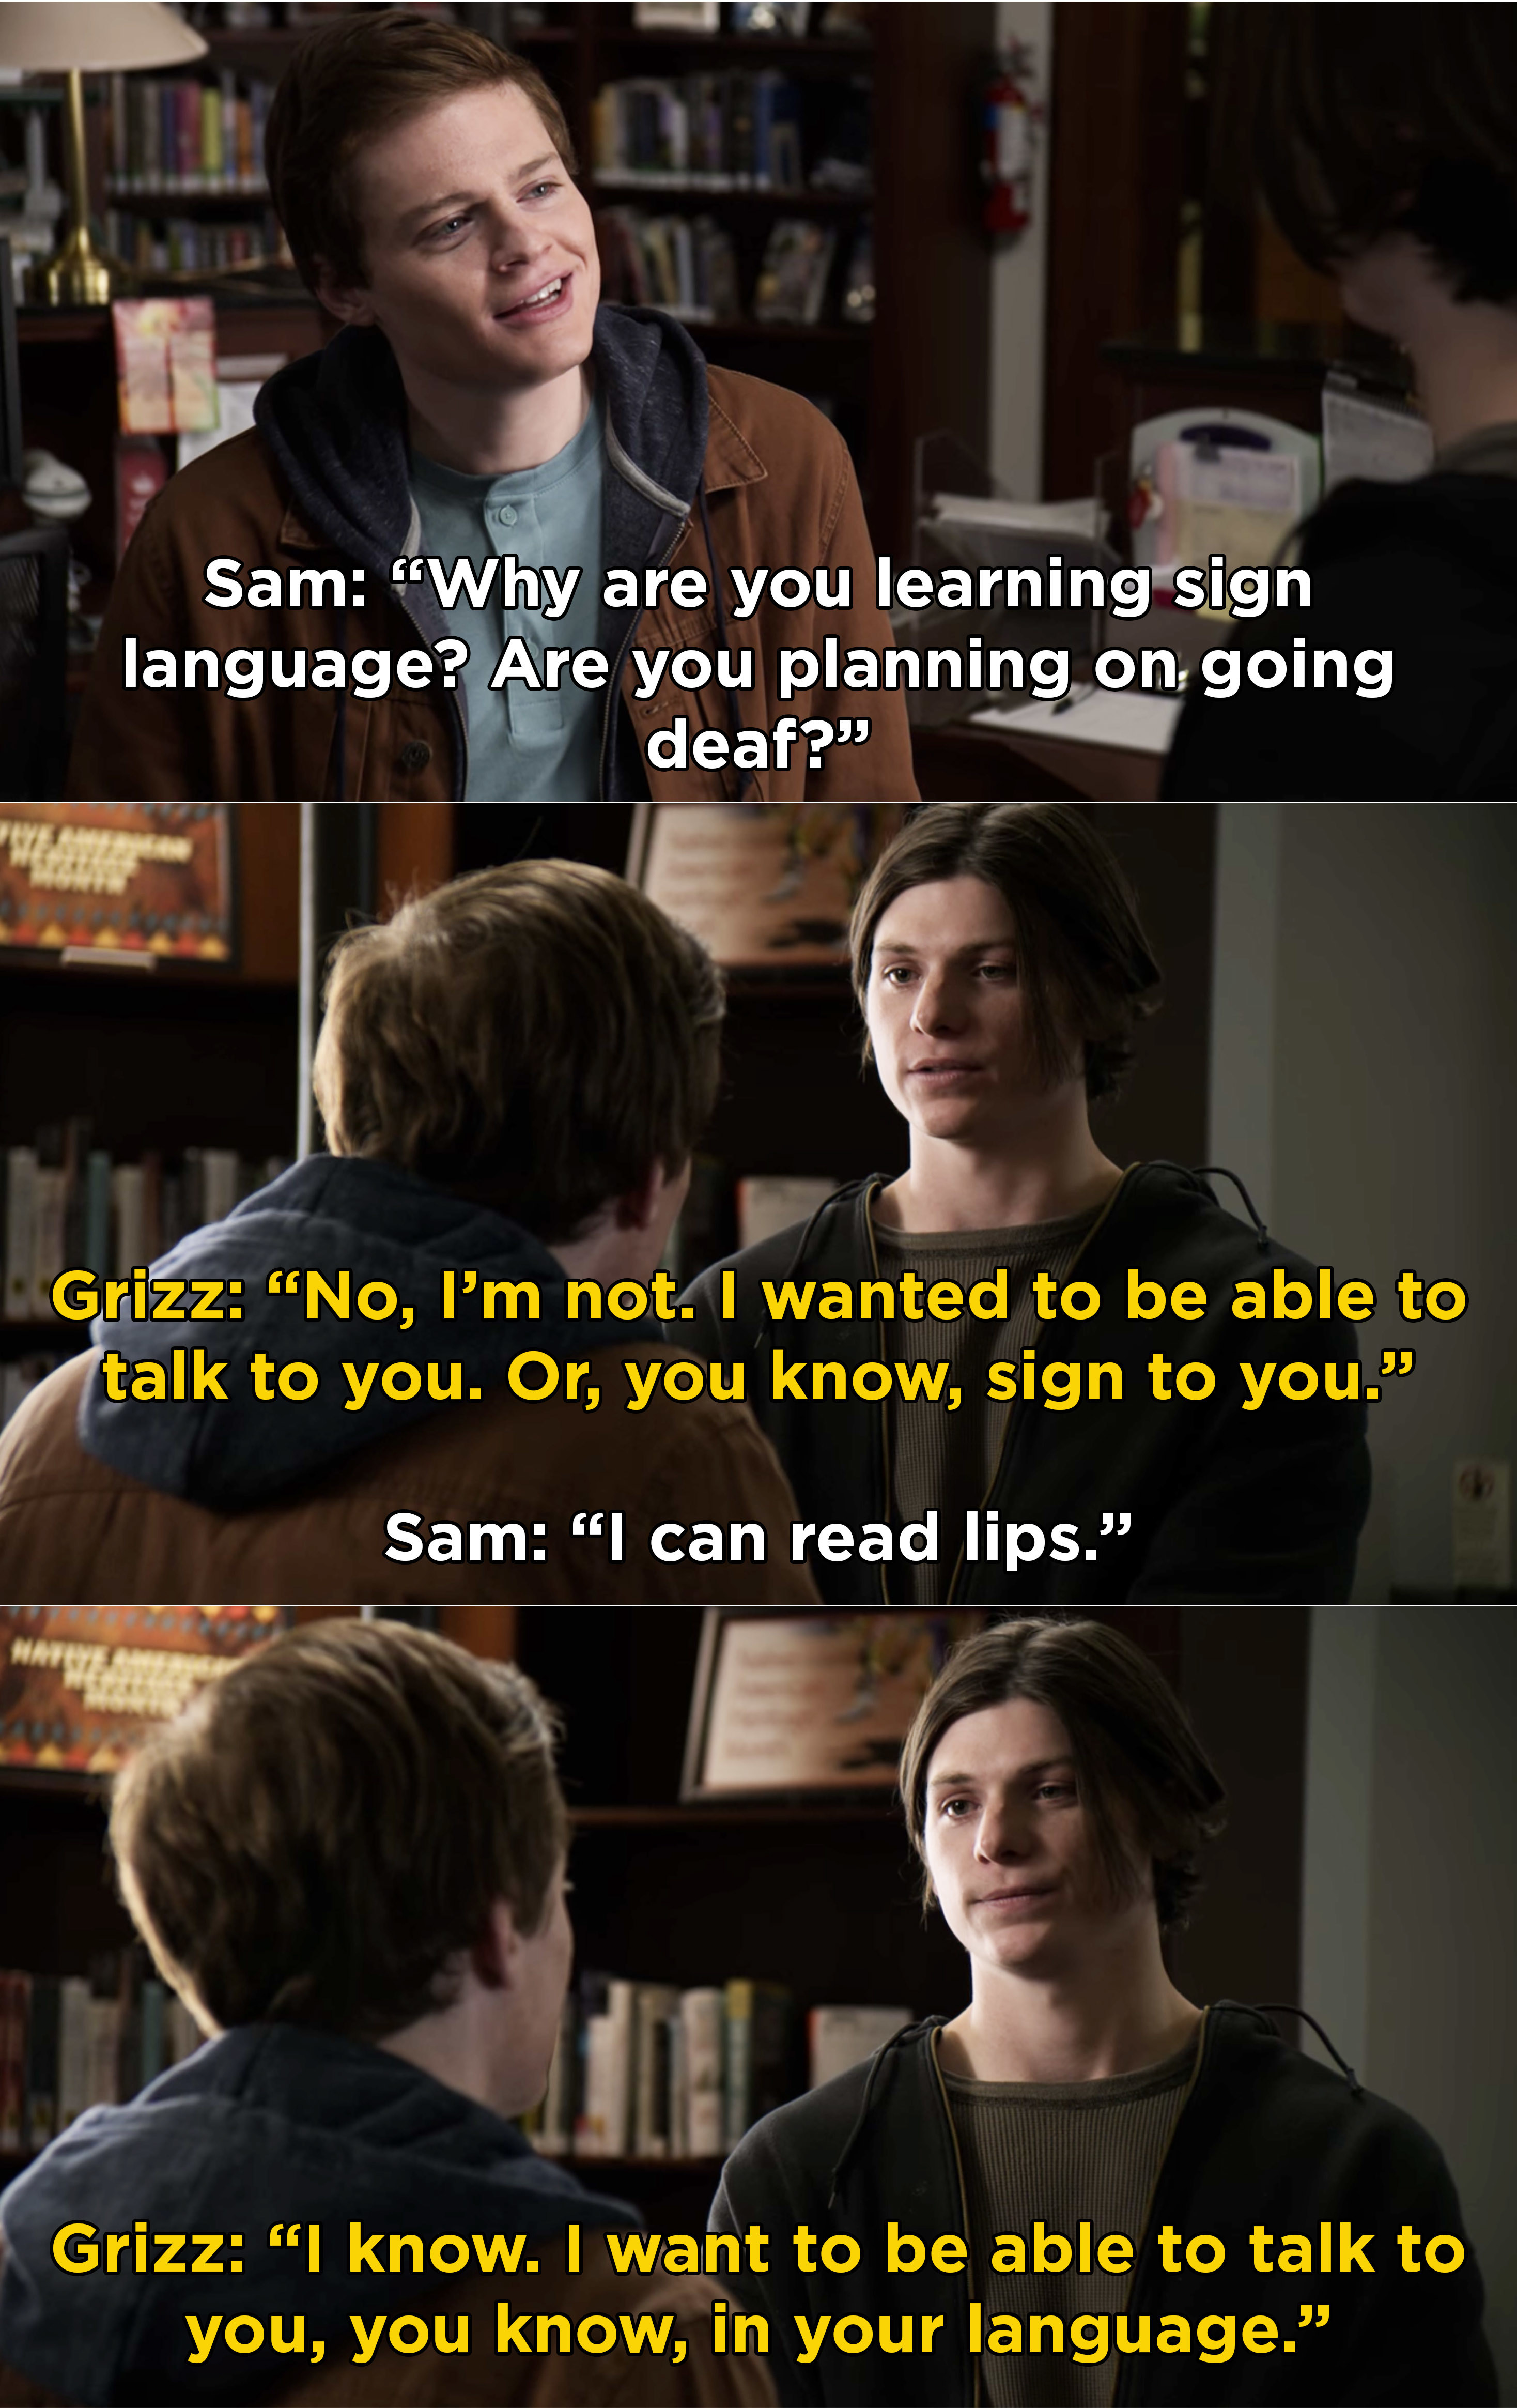 Grizz telling Sam that he wants to learn sign language so he can talk to him better